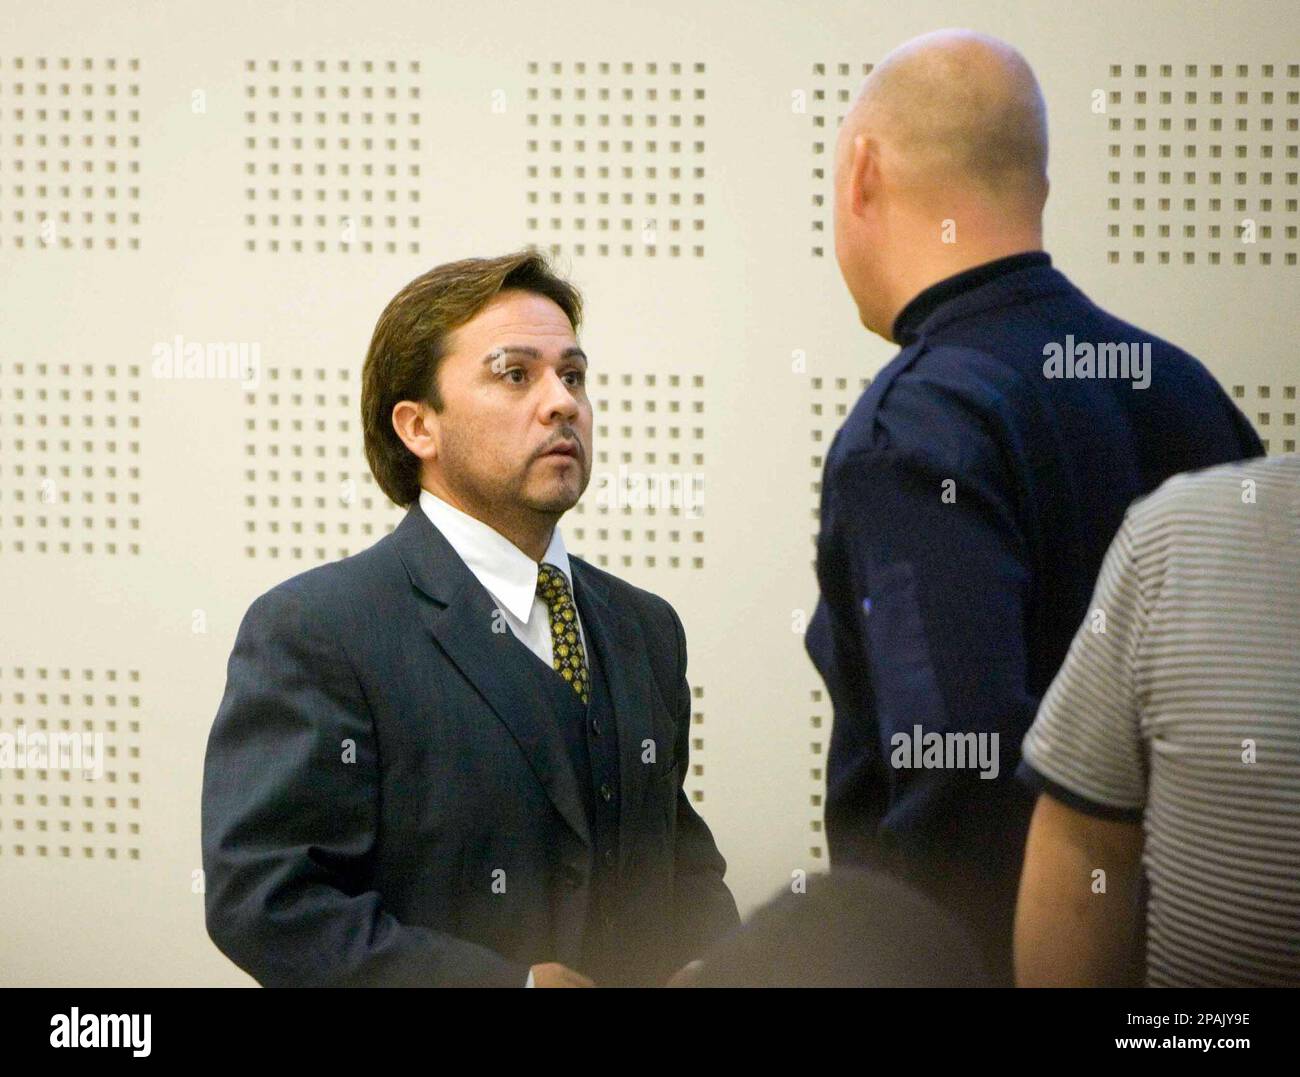 Chilean tenor Tito Beltran, left, talks to an unidentified man during the court hearing in Ystad, Sweden Wednesday Jan. 16, 2008. The 42-year-old opera star, who lives in Sweden, stands trial accused of raping a nanny employed by a Swedish actress in a hotel room in southern Sweden in 1999. (AP Photo/Drago Prvulovic) ** SWEDEN OUT ** Stock Photo